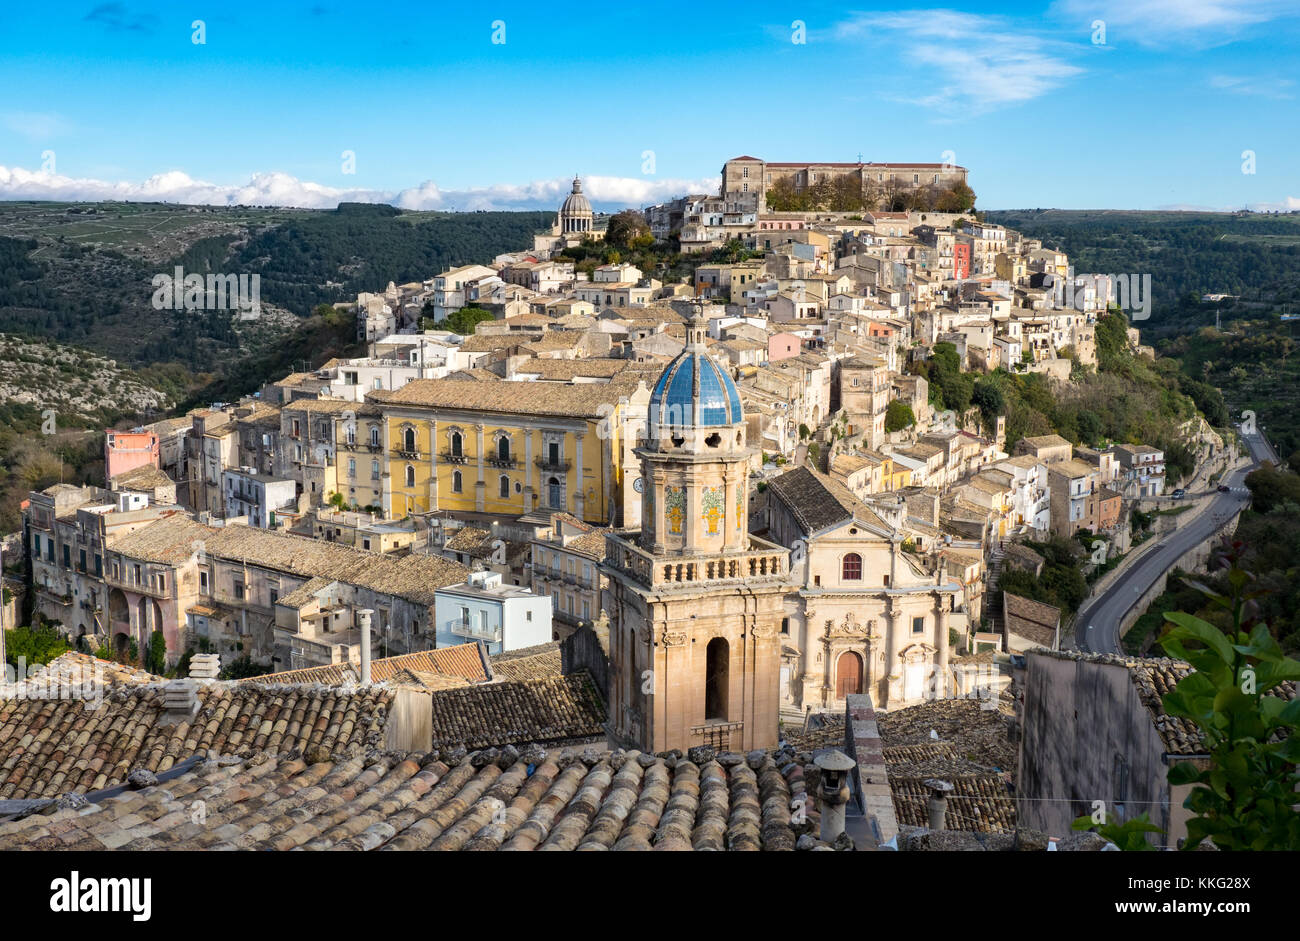 Ragusa, Sicily, Italy. Historic and beautiful Sicilian city Ragusa can be traced back to the 2nd millennium BC.In 1693 Ragusa Stock Photo